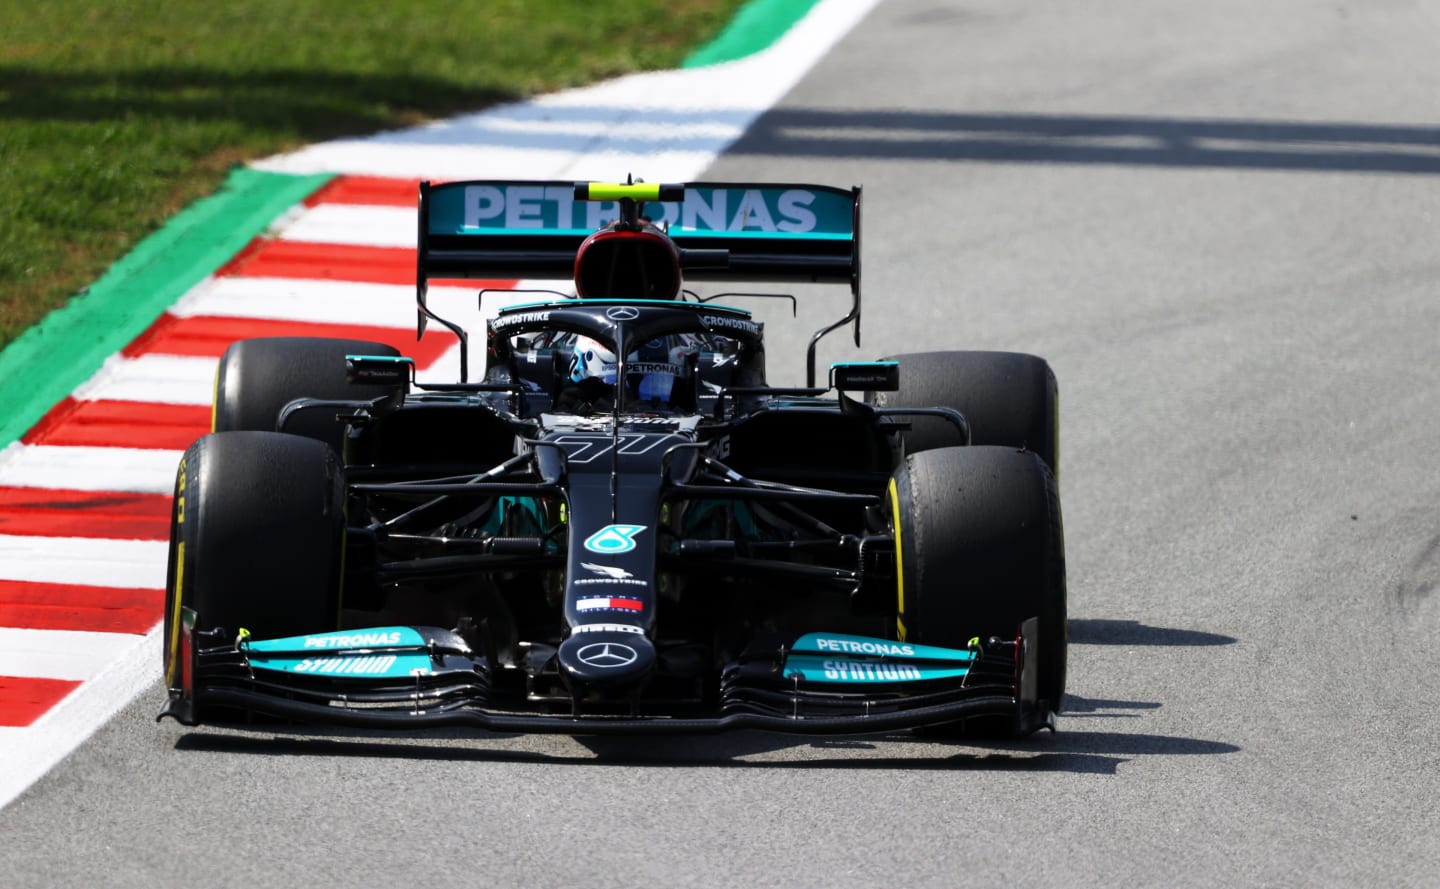 BARCELONA, SPAIN - MAY 07: Valtteri Bottas of Finland driving the (77) Mercedes AMG Petronas F1 Team Mercedes W12 on track during practice for the F1 Grand Prix of Spain at Circuit de Barcelona-Catalunya on May 07, 2021 in Barcelona, Spain. (Photo by Bryn Lennon/Getty Images)